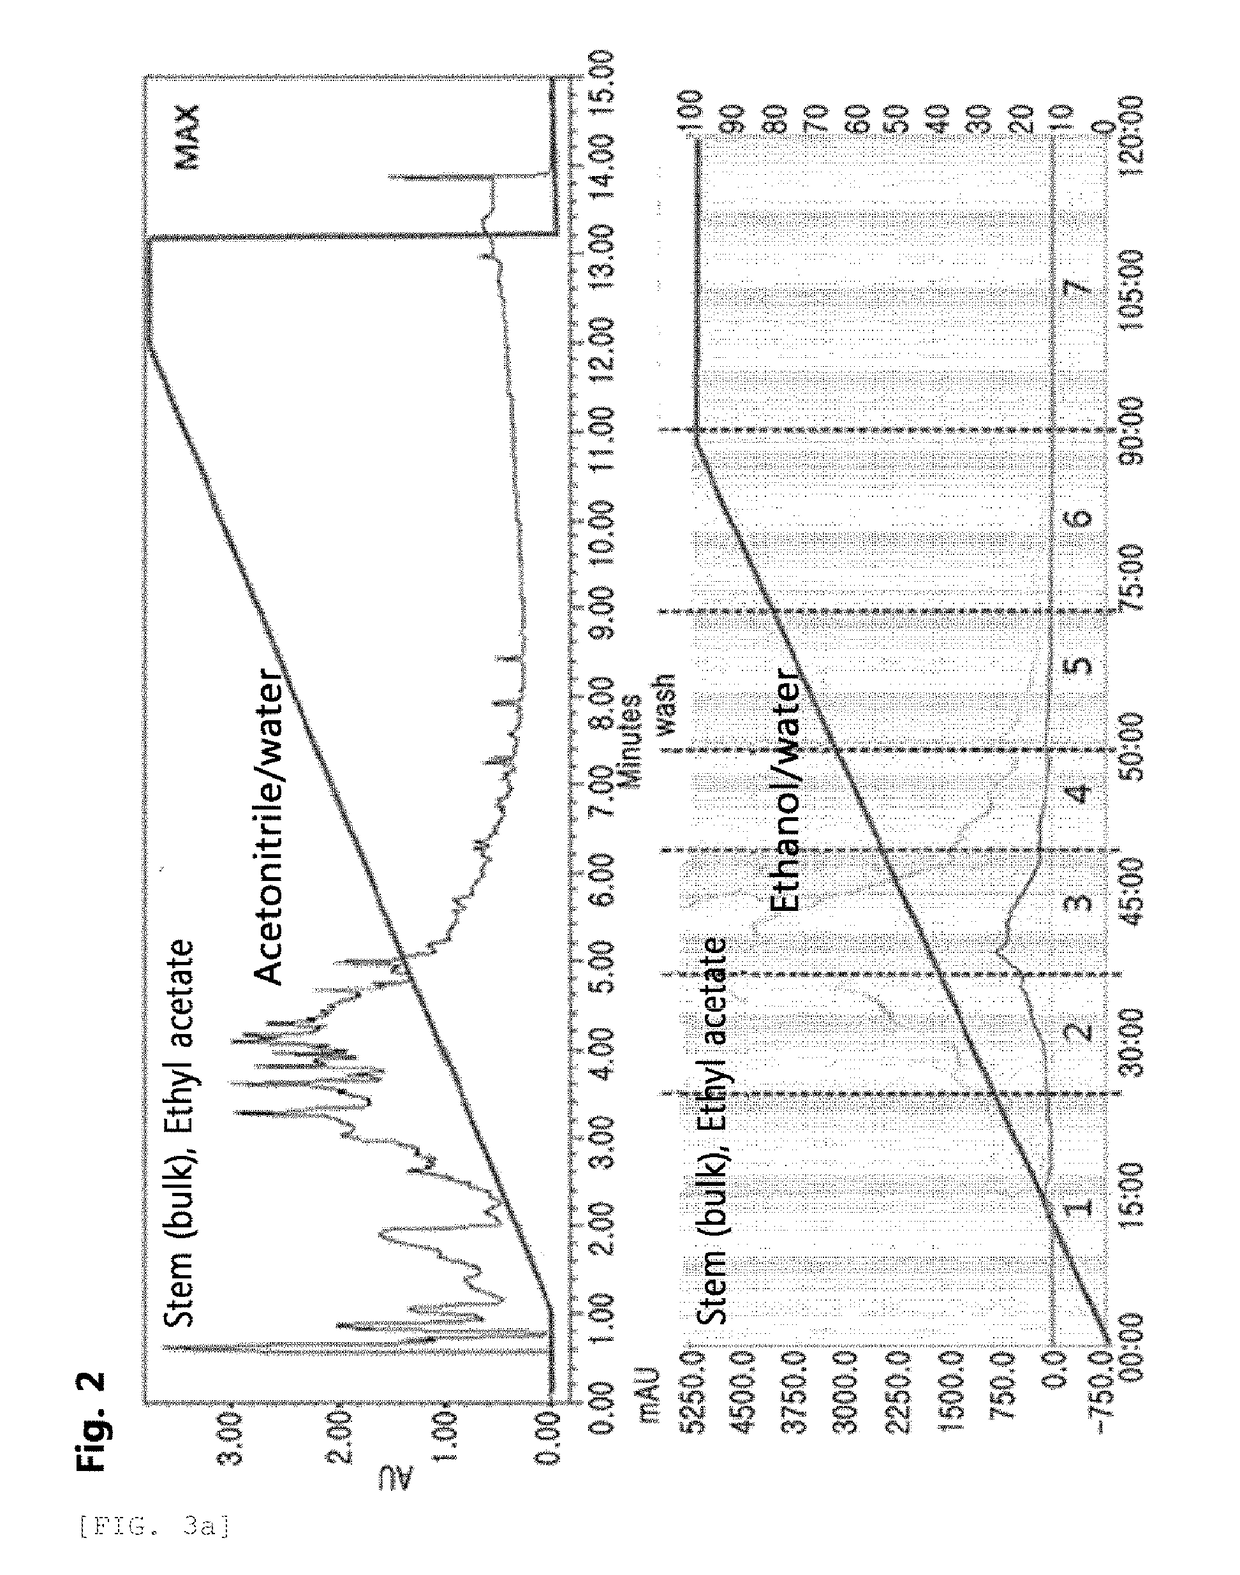 Pharmaceutical composition for preventing or treating asthma comprising pistacia weinmannifolia j. poiss. ex franch extract or fraction thereof